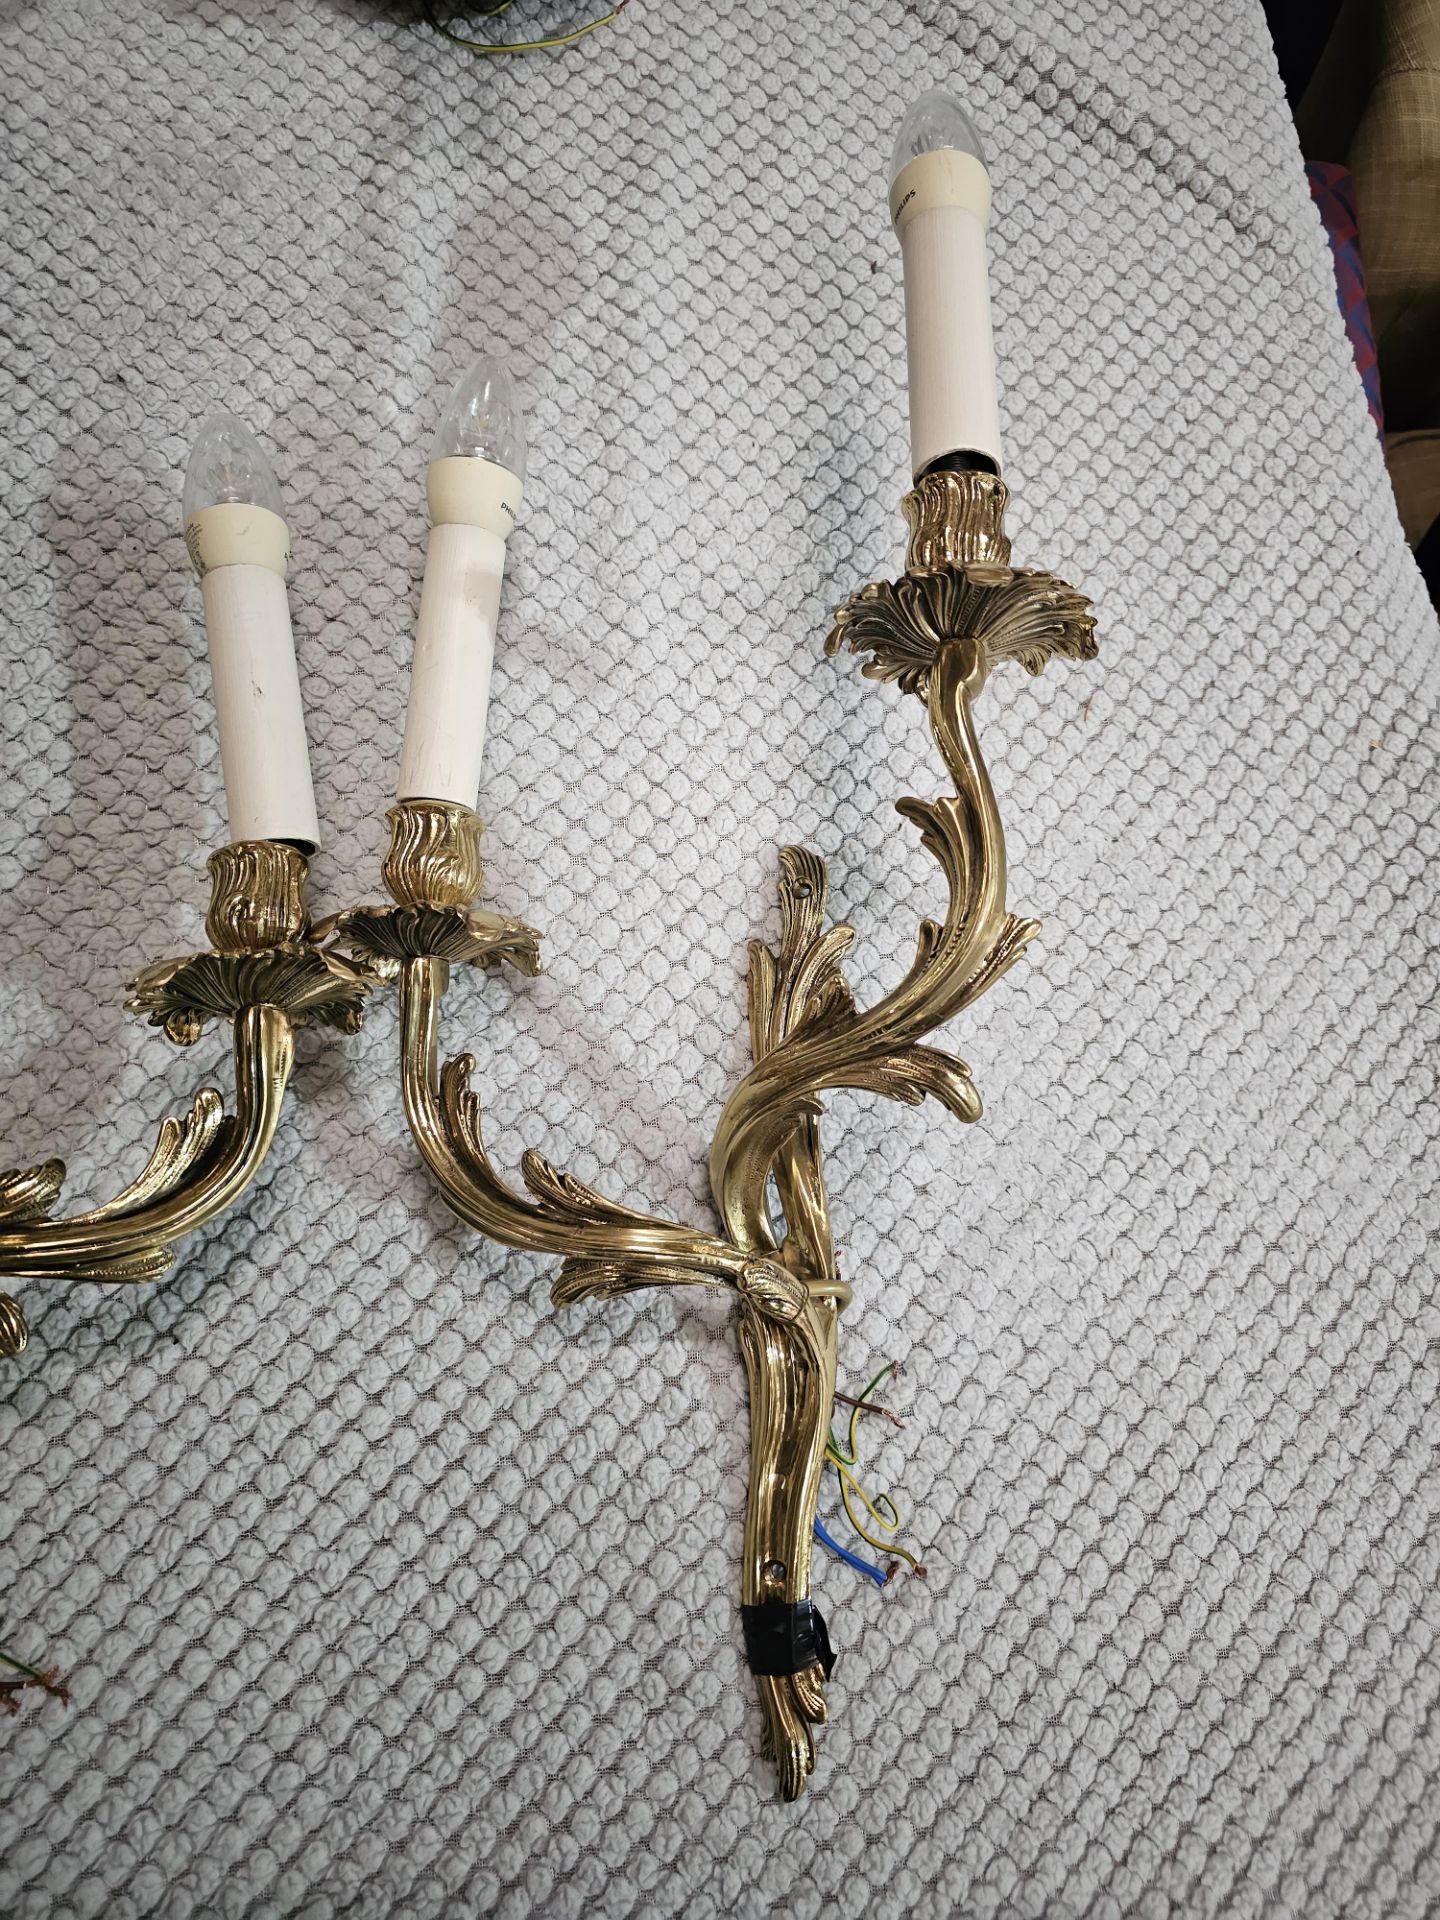 A Pair Of Louis XV Style Wall Appliques In Gilt Bronze With Two Candles Agrafe Decor On Which Are - Image 2 of 3